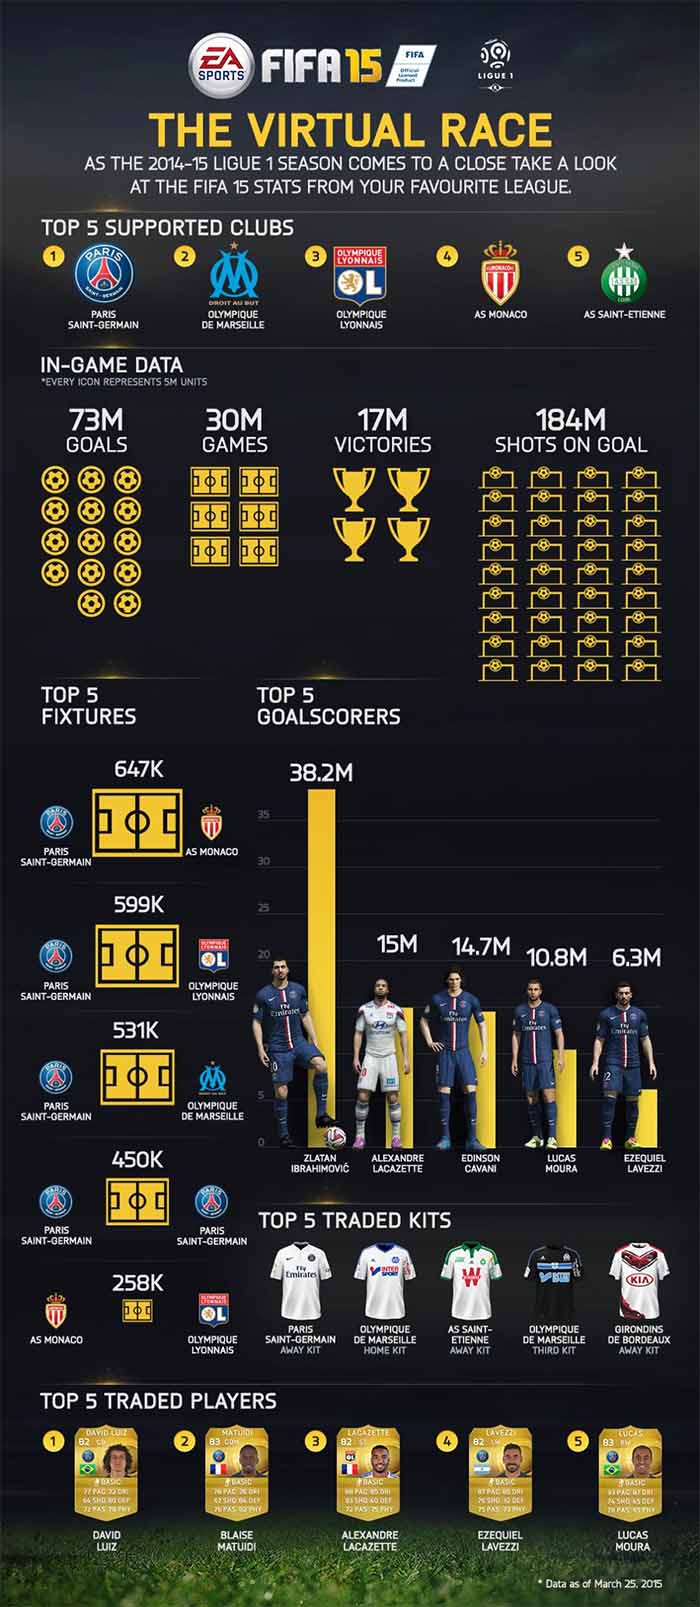 FIFA 15 Most Popular Leagues Analysis